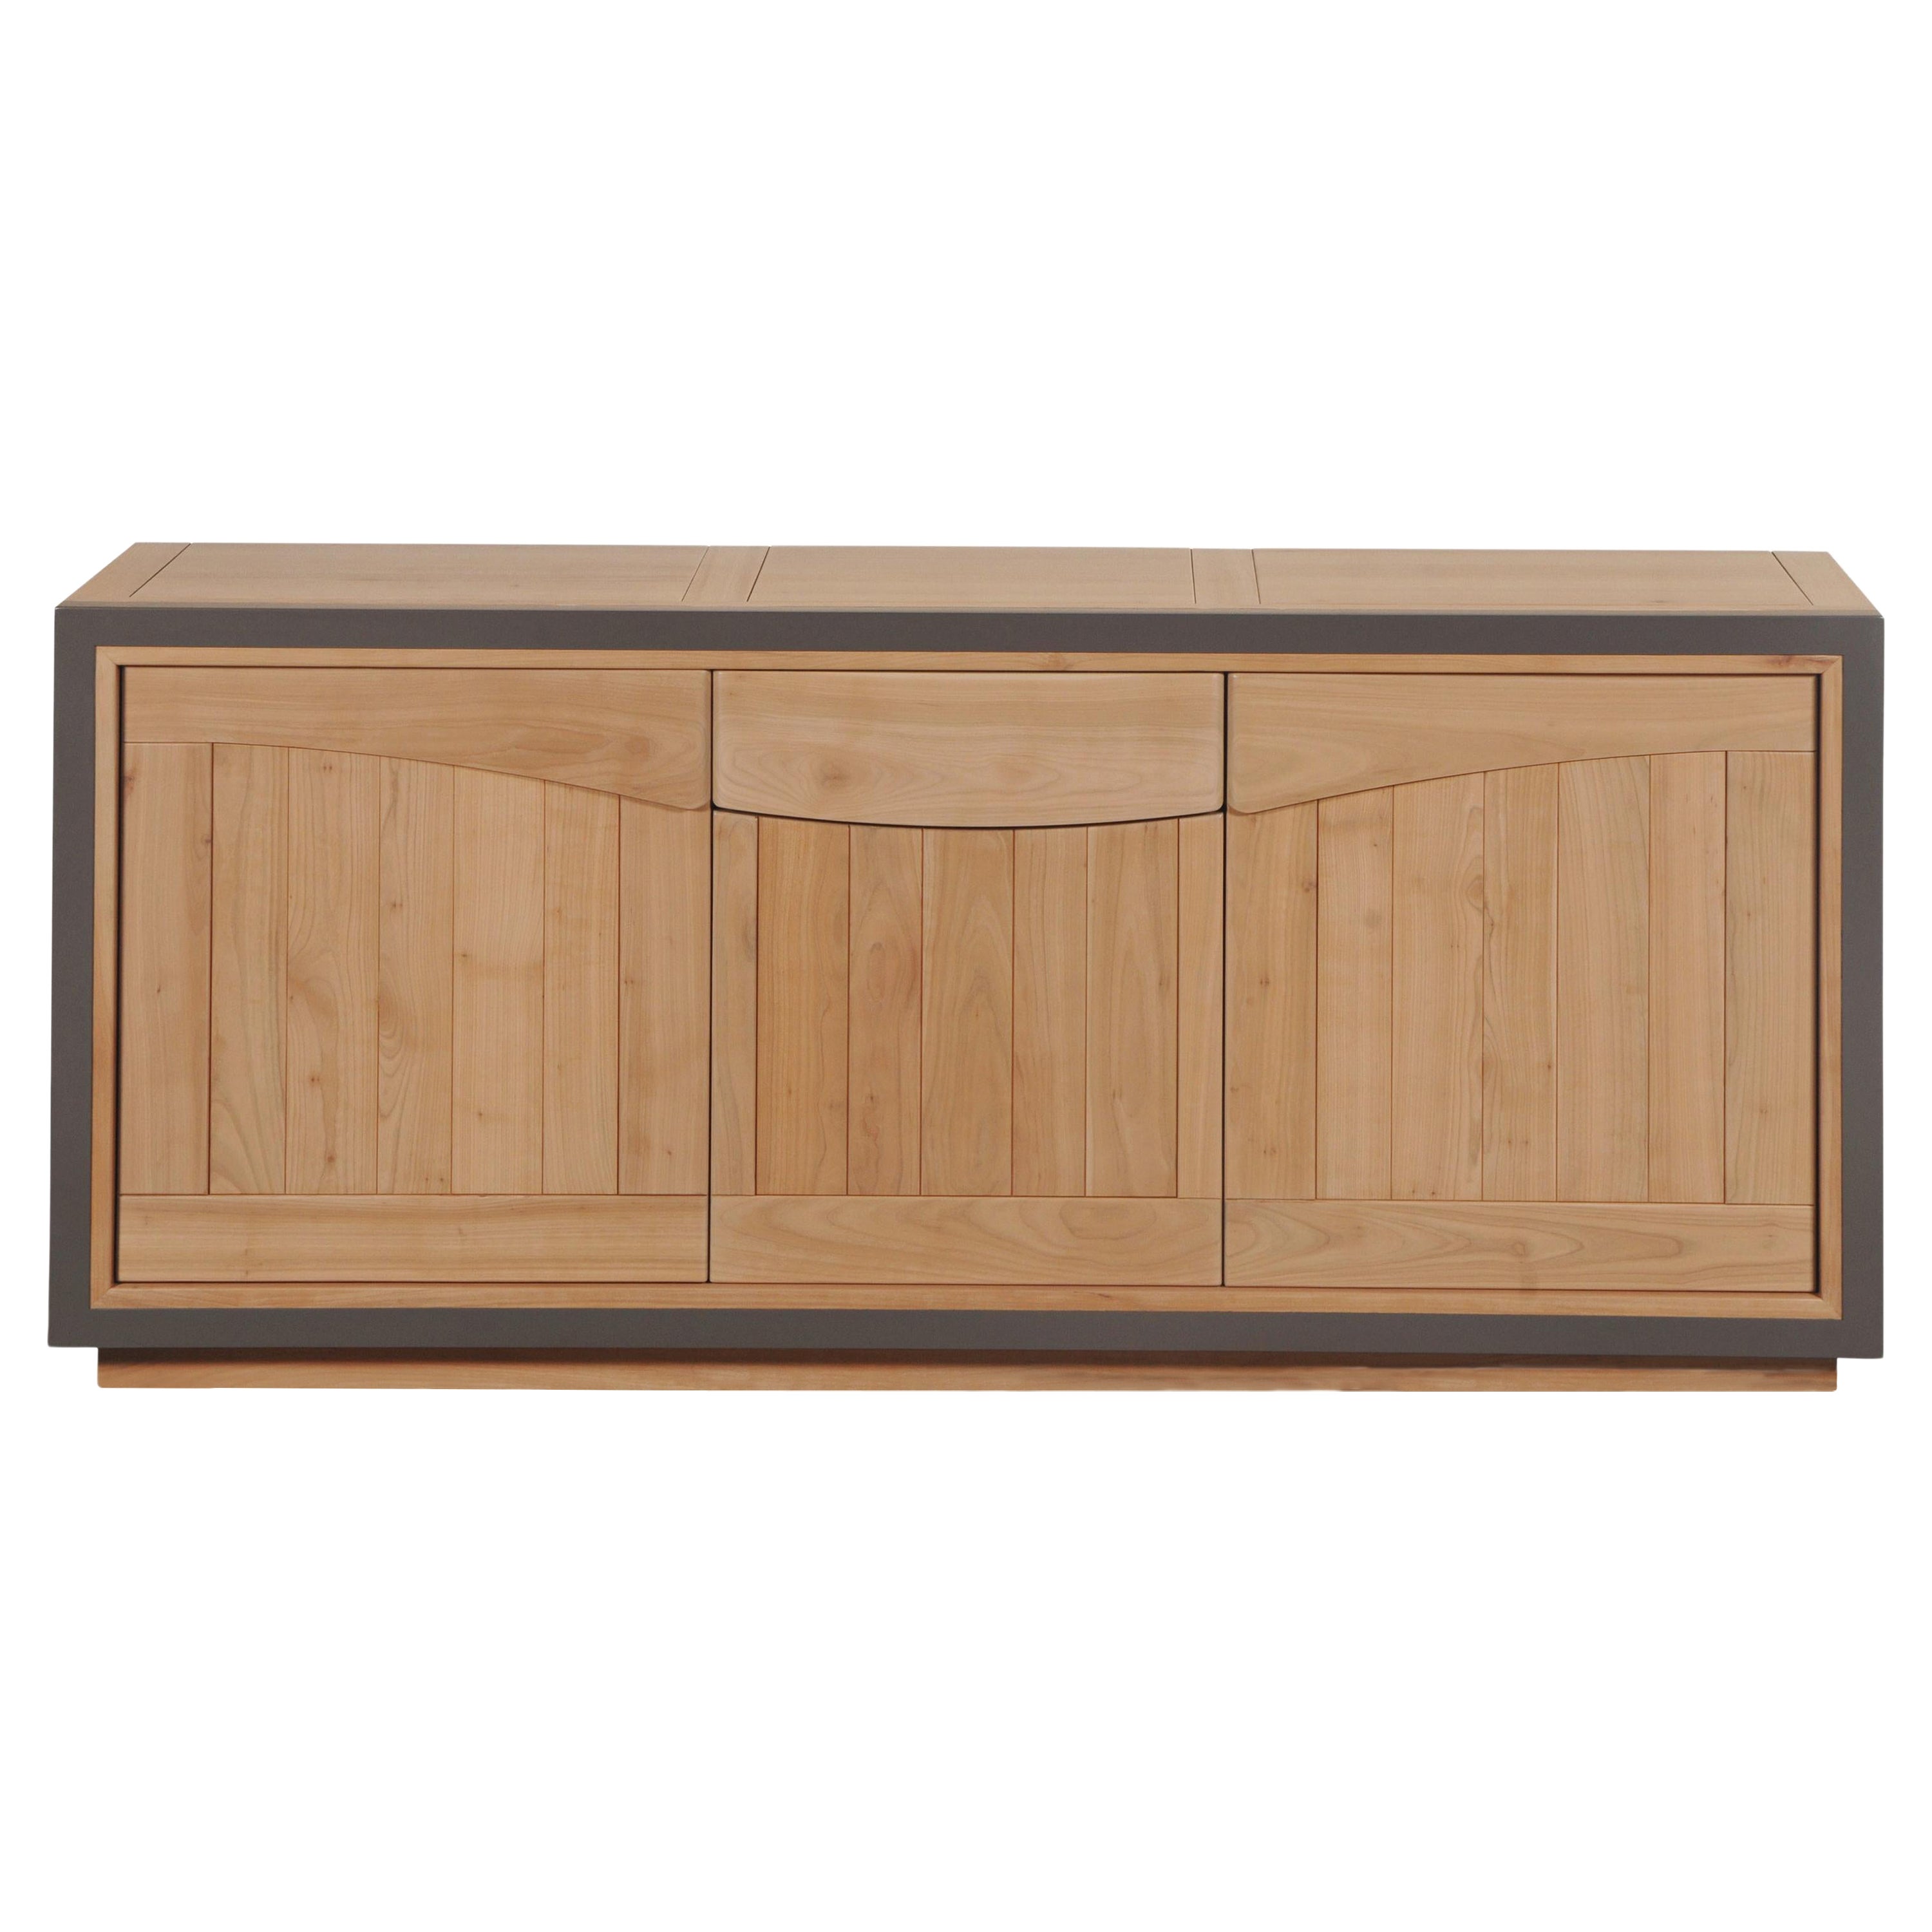 Contemporary Sideboard in Cherry, 3 Doors and 1 Drawer, 100% Made in France